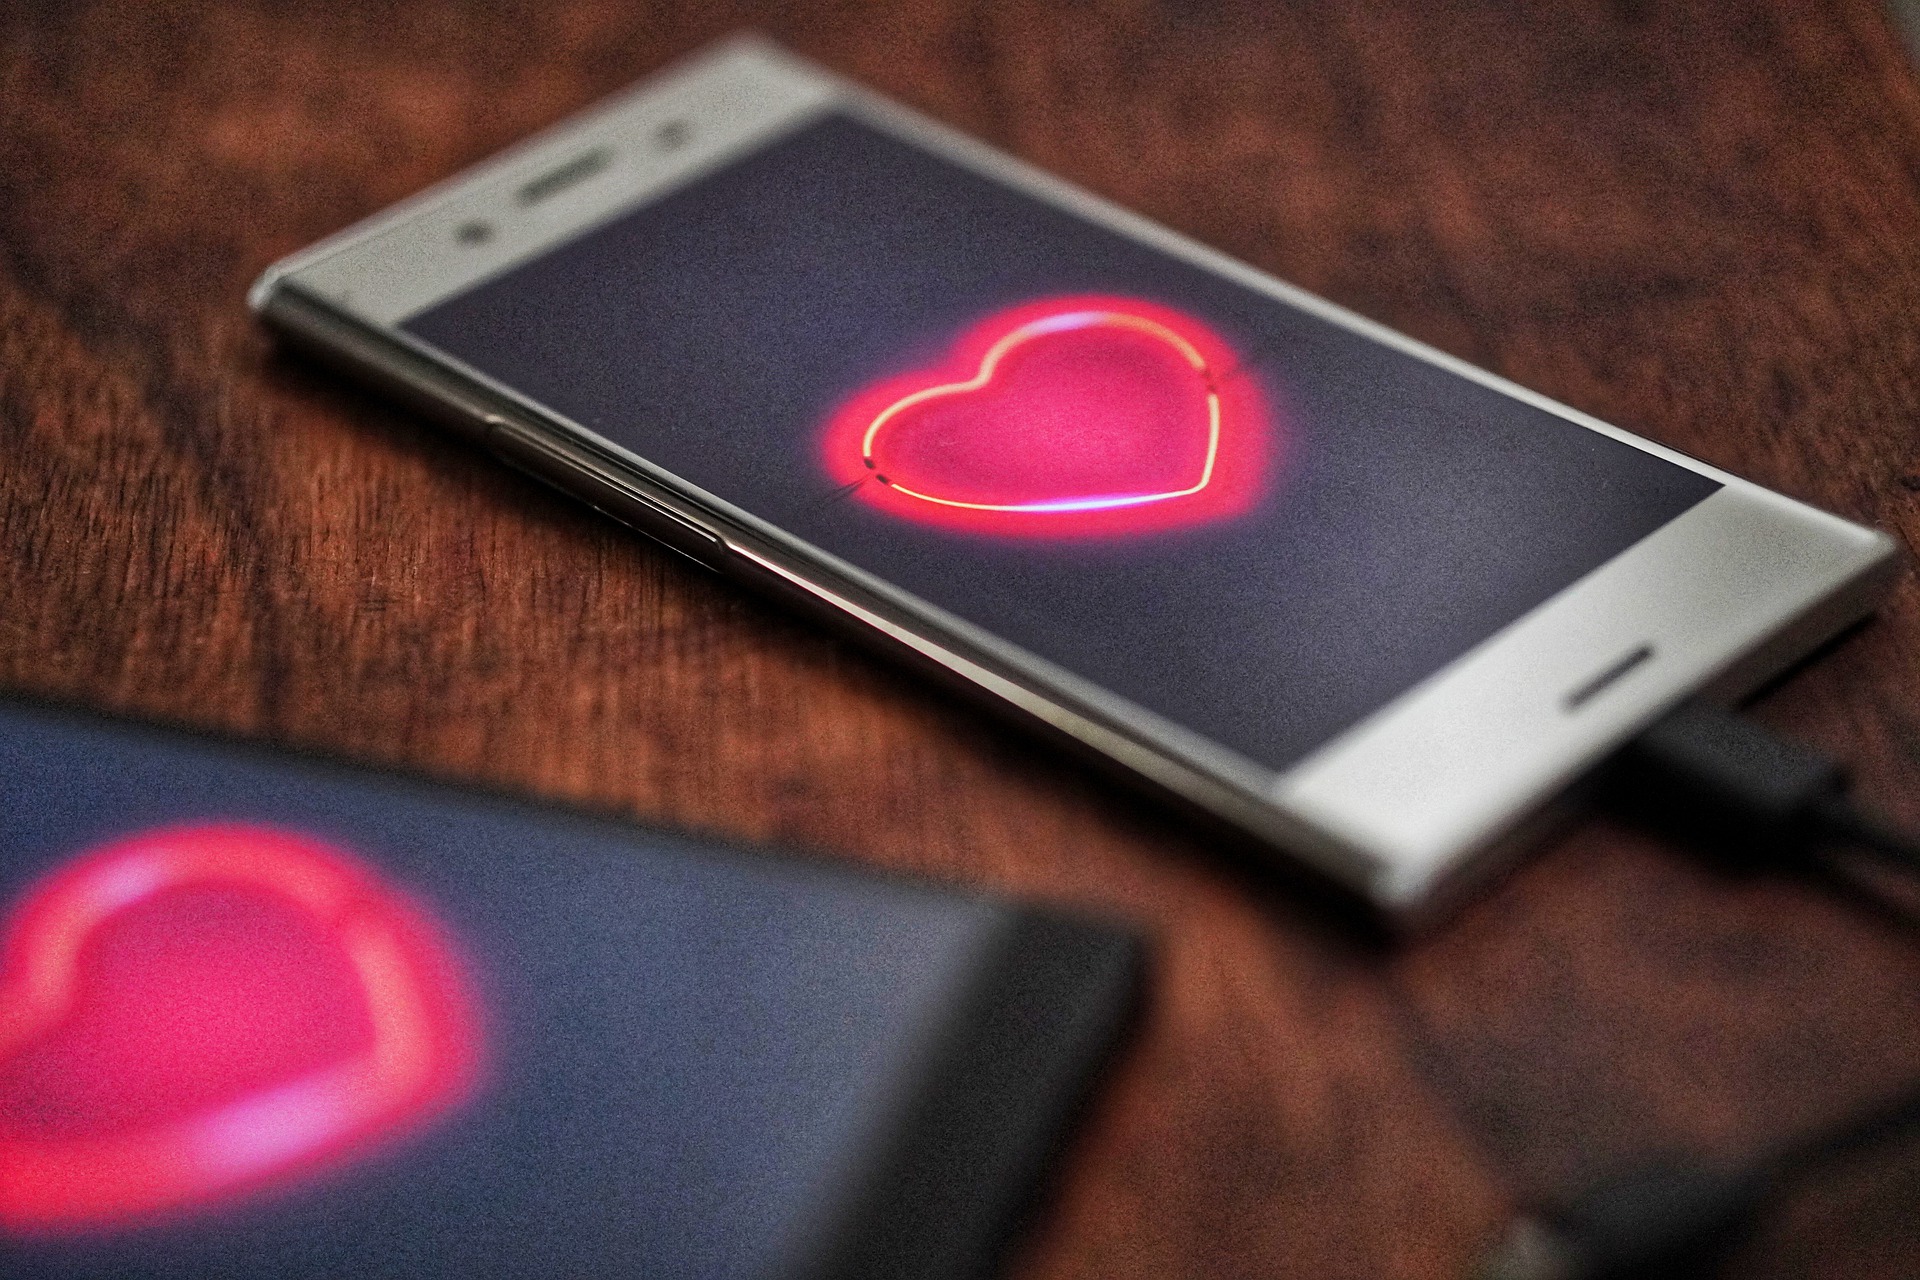 A smartphone with an image of a heart on its screen